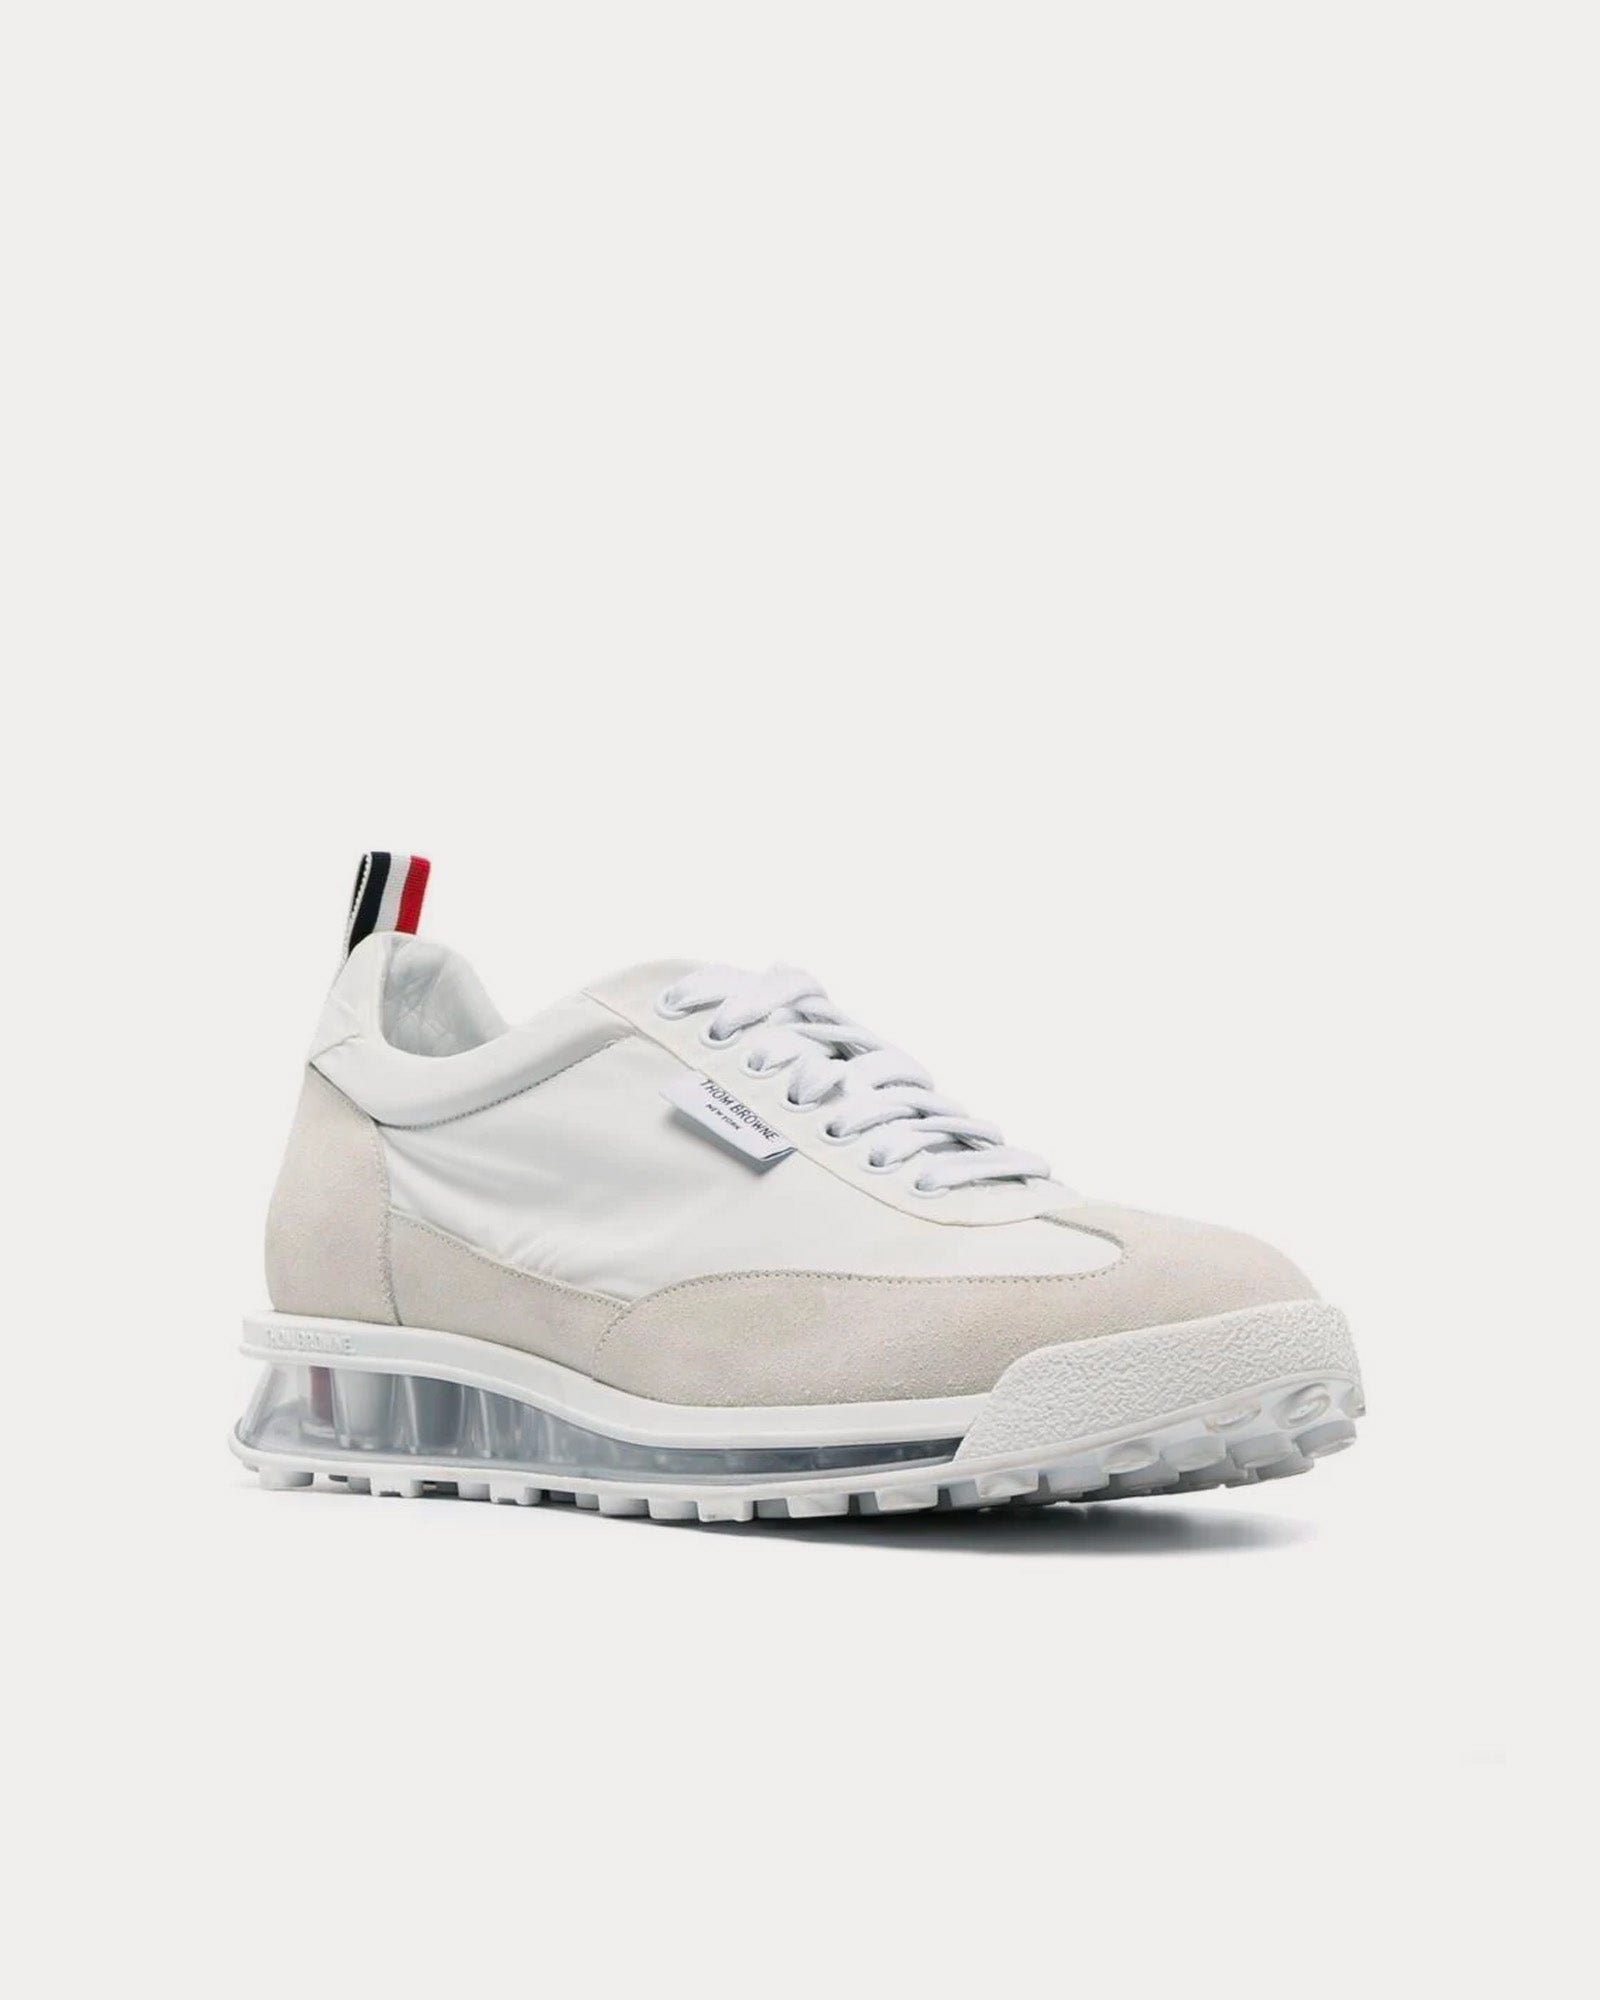 Thom Browne - Tech Runner Clear Sole Nylon White Low Top Sneakers